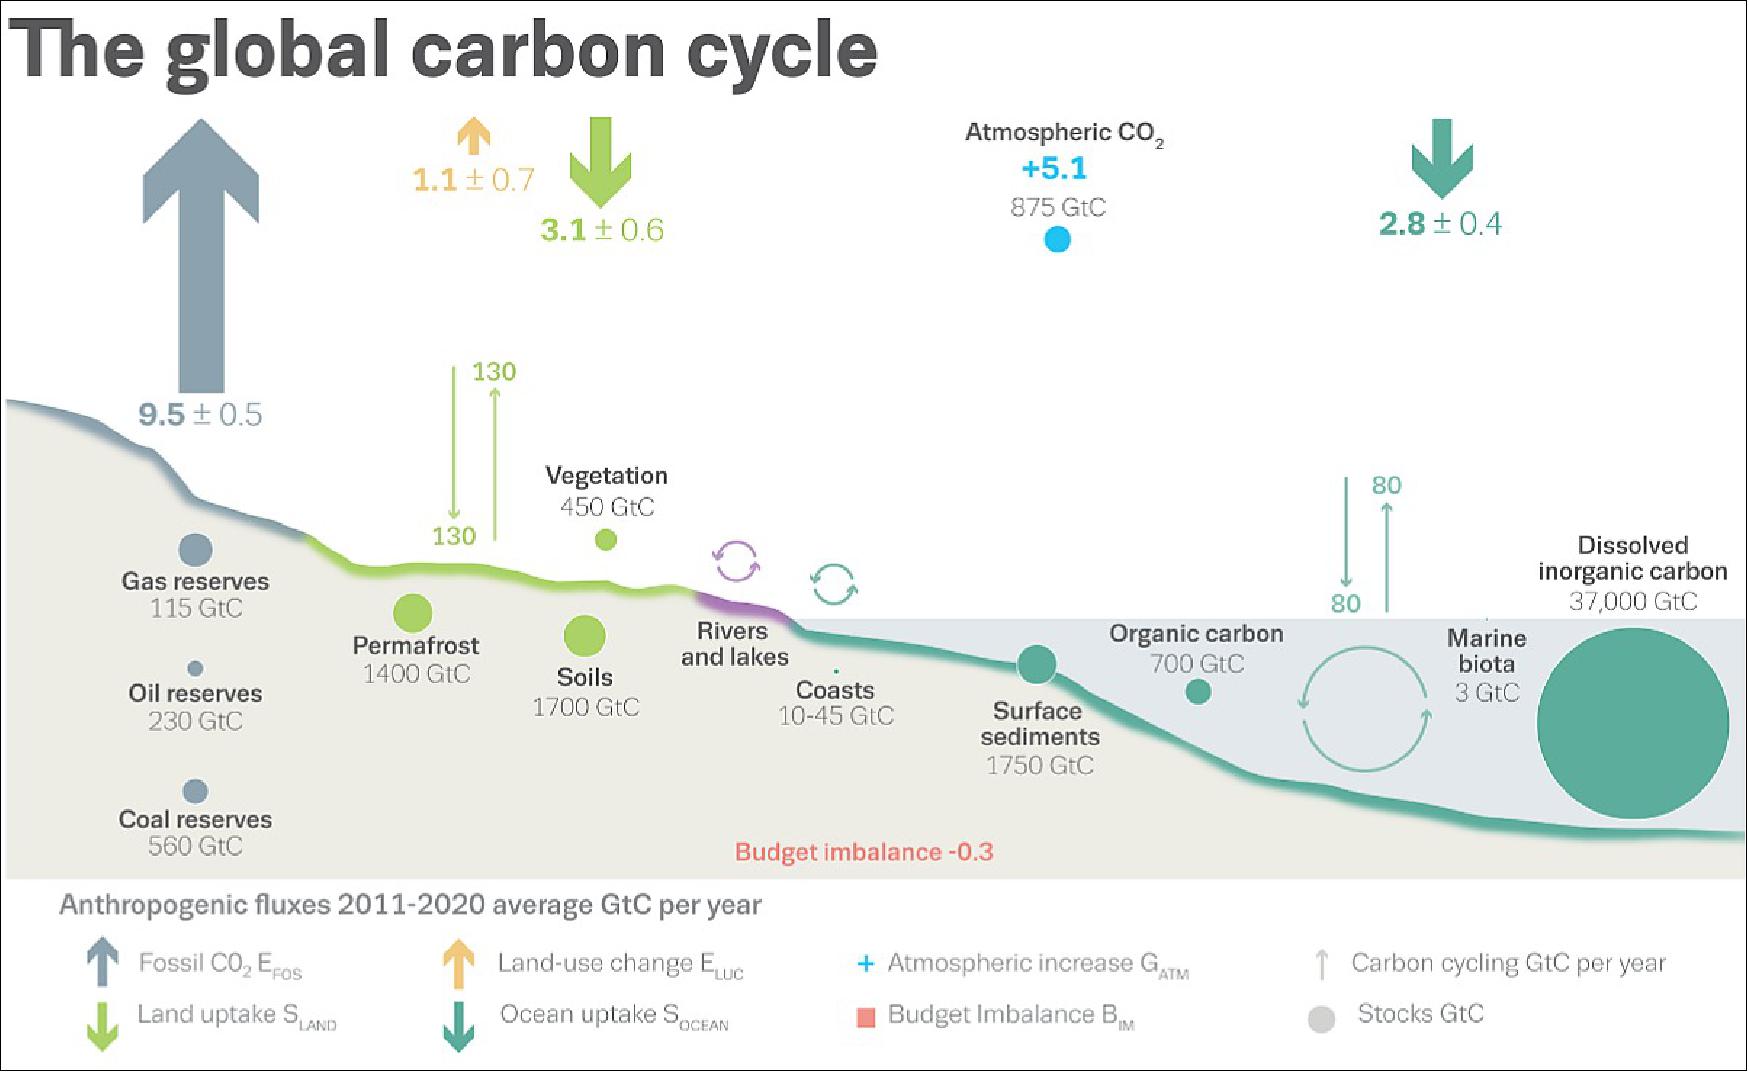 Figure 2: Schematic representation of the overall perturbation of the global carbon cycle caused by anthropogenic activities, averaged globally for the decade 2011–2020. See legends for the corresponding arrows and units. The uncertainty in the atmospheric CO2 growth rate is very small (±0.02 GtC yr-1) and is neglected for the figure. The anthropogenic perturbation occurs on top of an active carbon cycle, with fluxes and stocks represented in the background and taken from Canadell et al. (2022) for all numbers, except for the carbon stocks in coasts which is from a literature review of coastal marine sediments (Price and Warren, 2016).